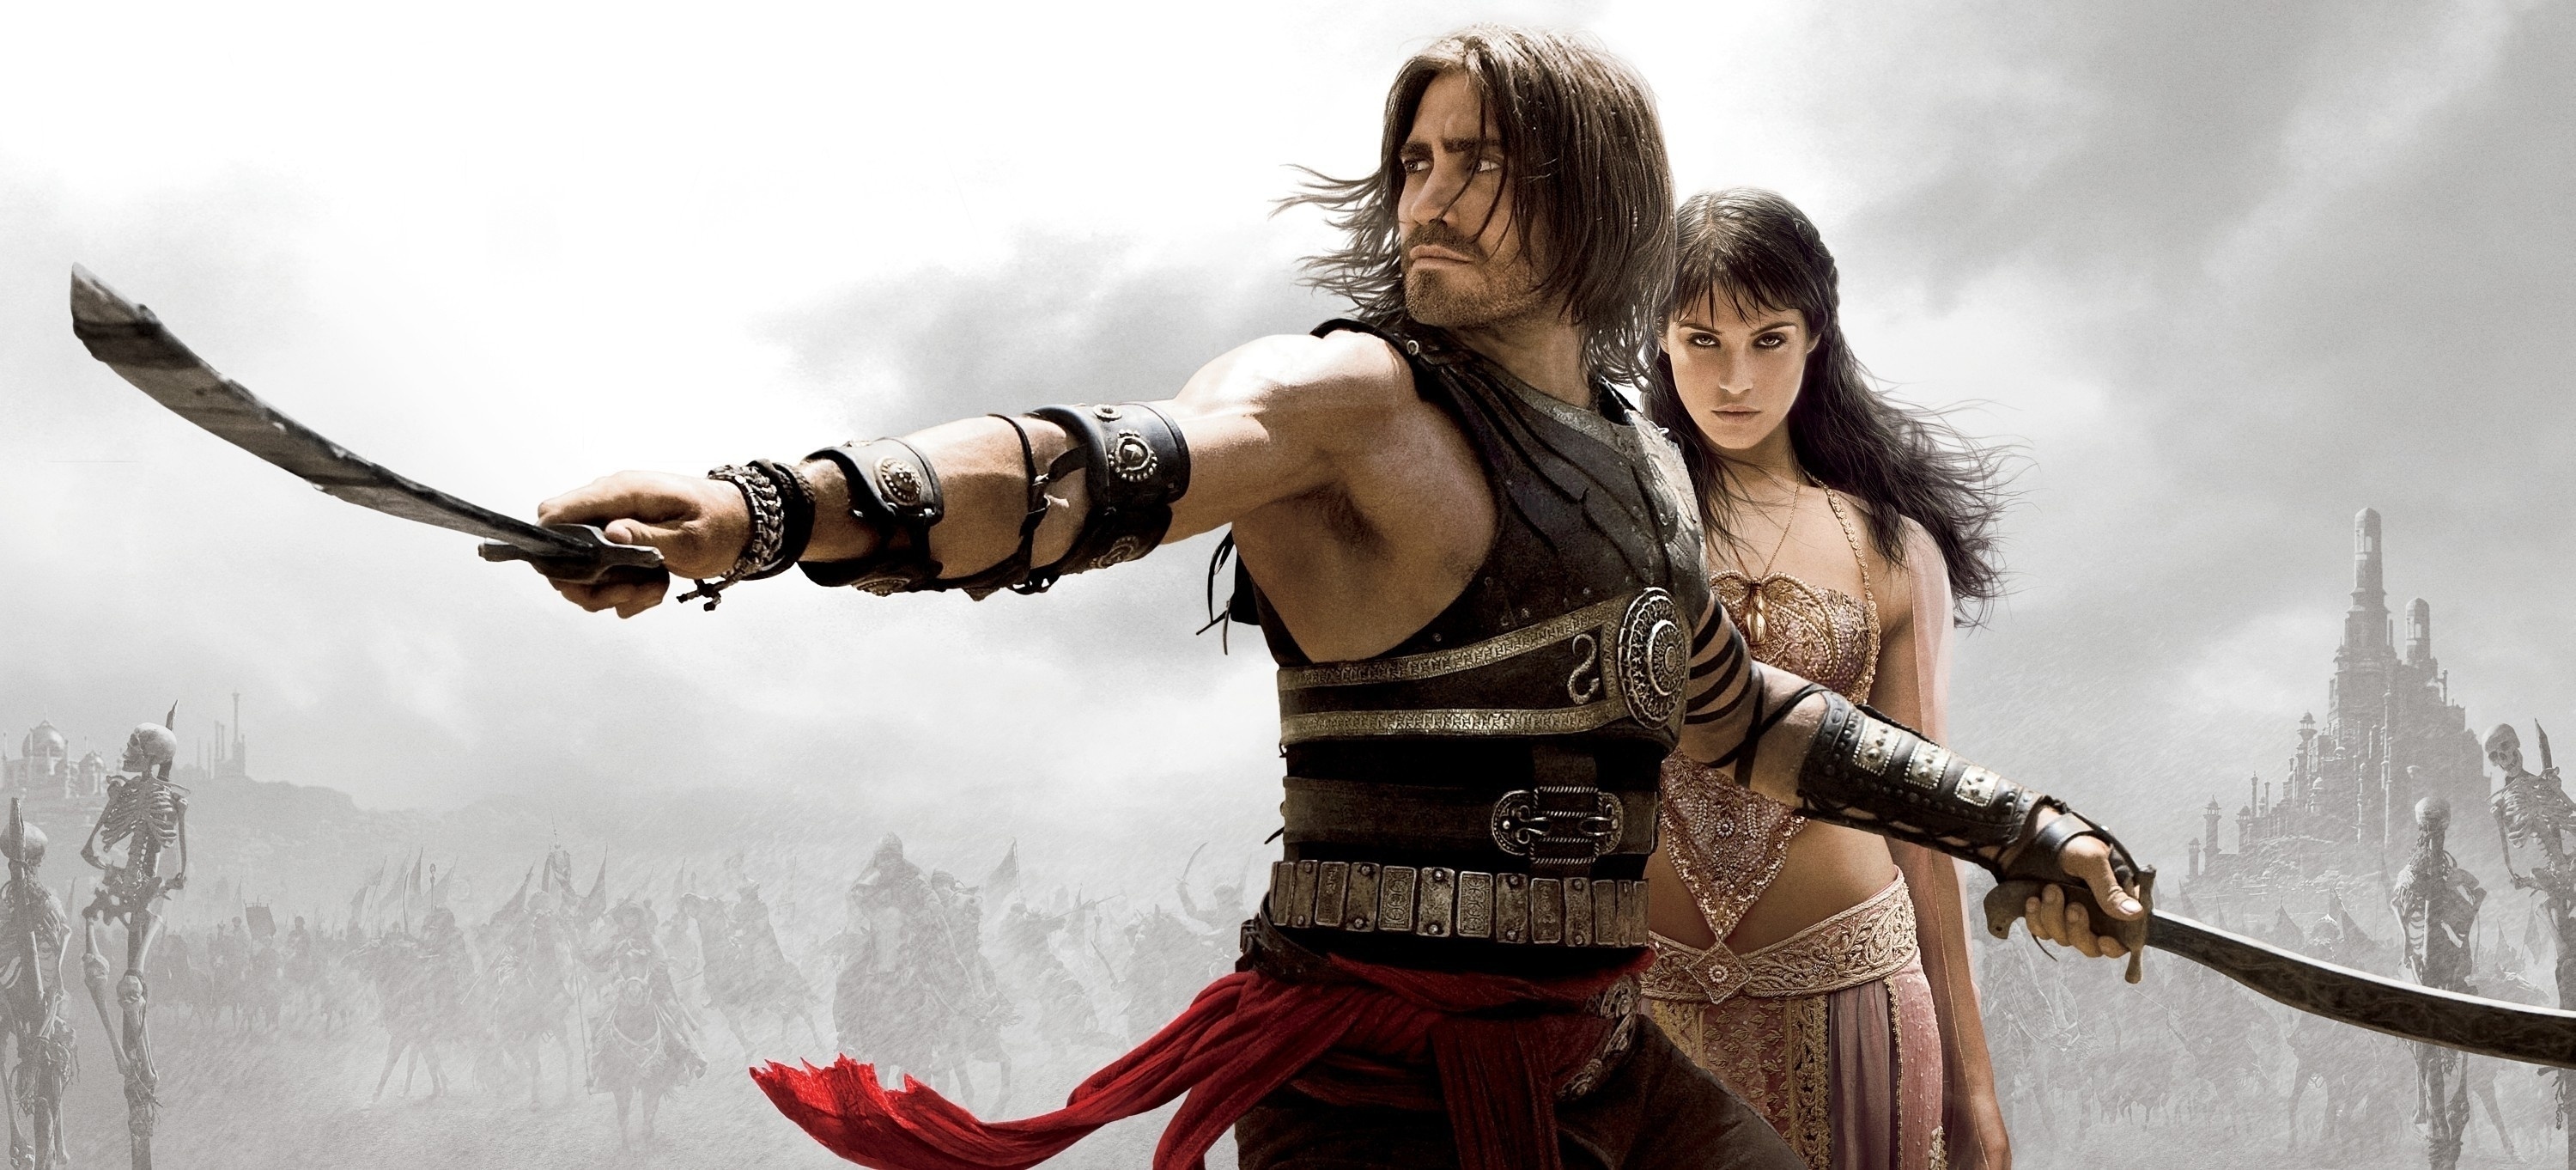 Prince Of Persia: The Sands Of Time Pics, Movie Collection